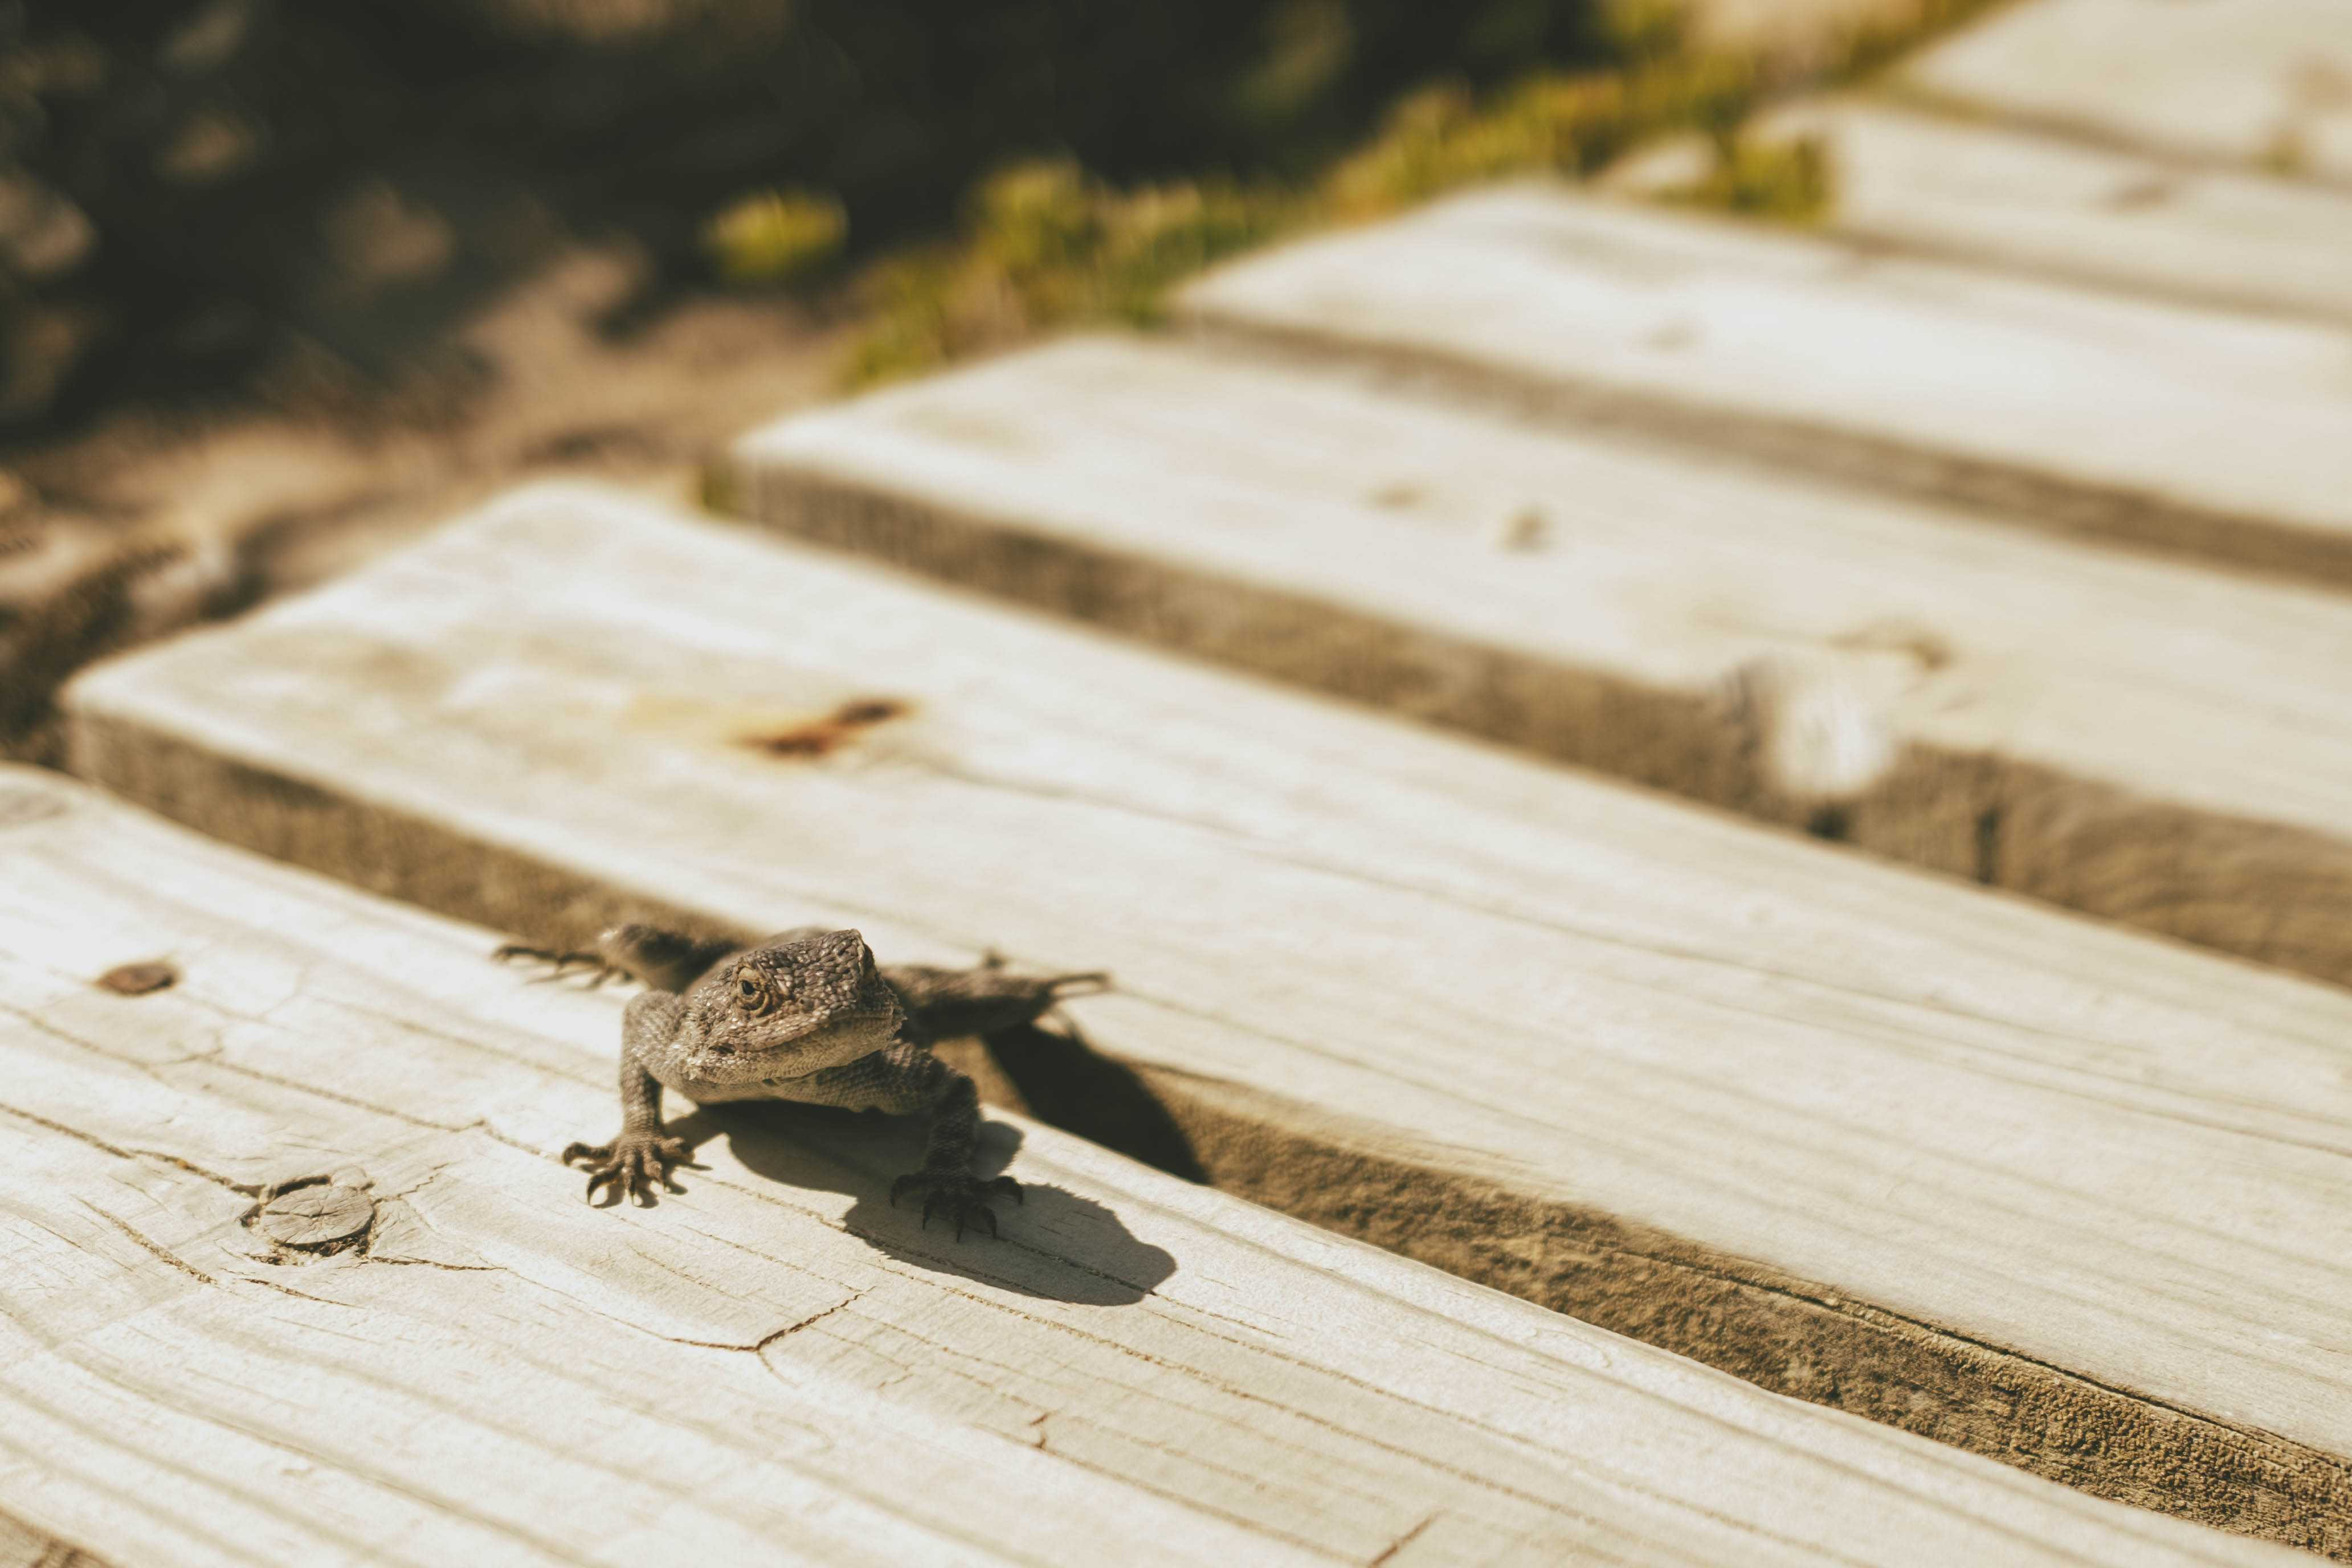 A tight shot of a small lizard on wooden path